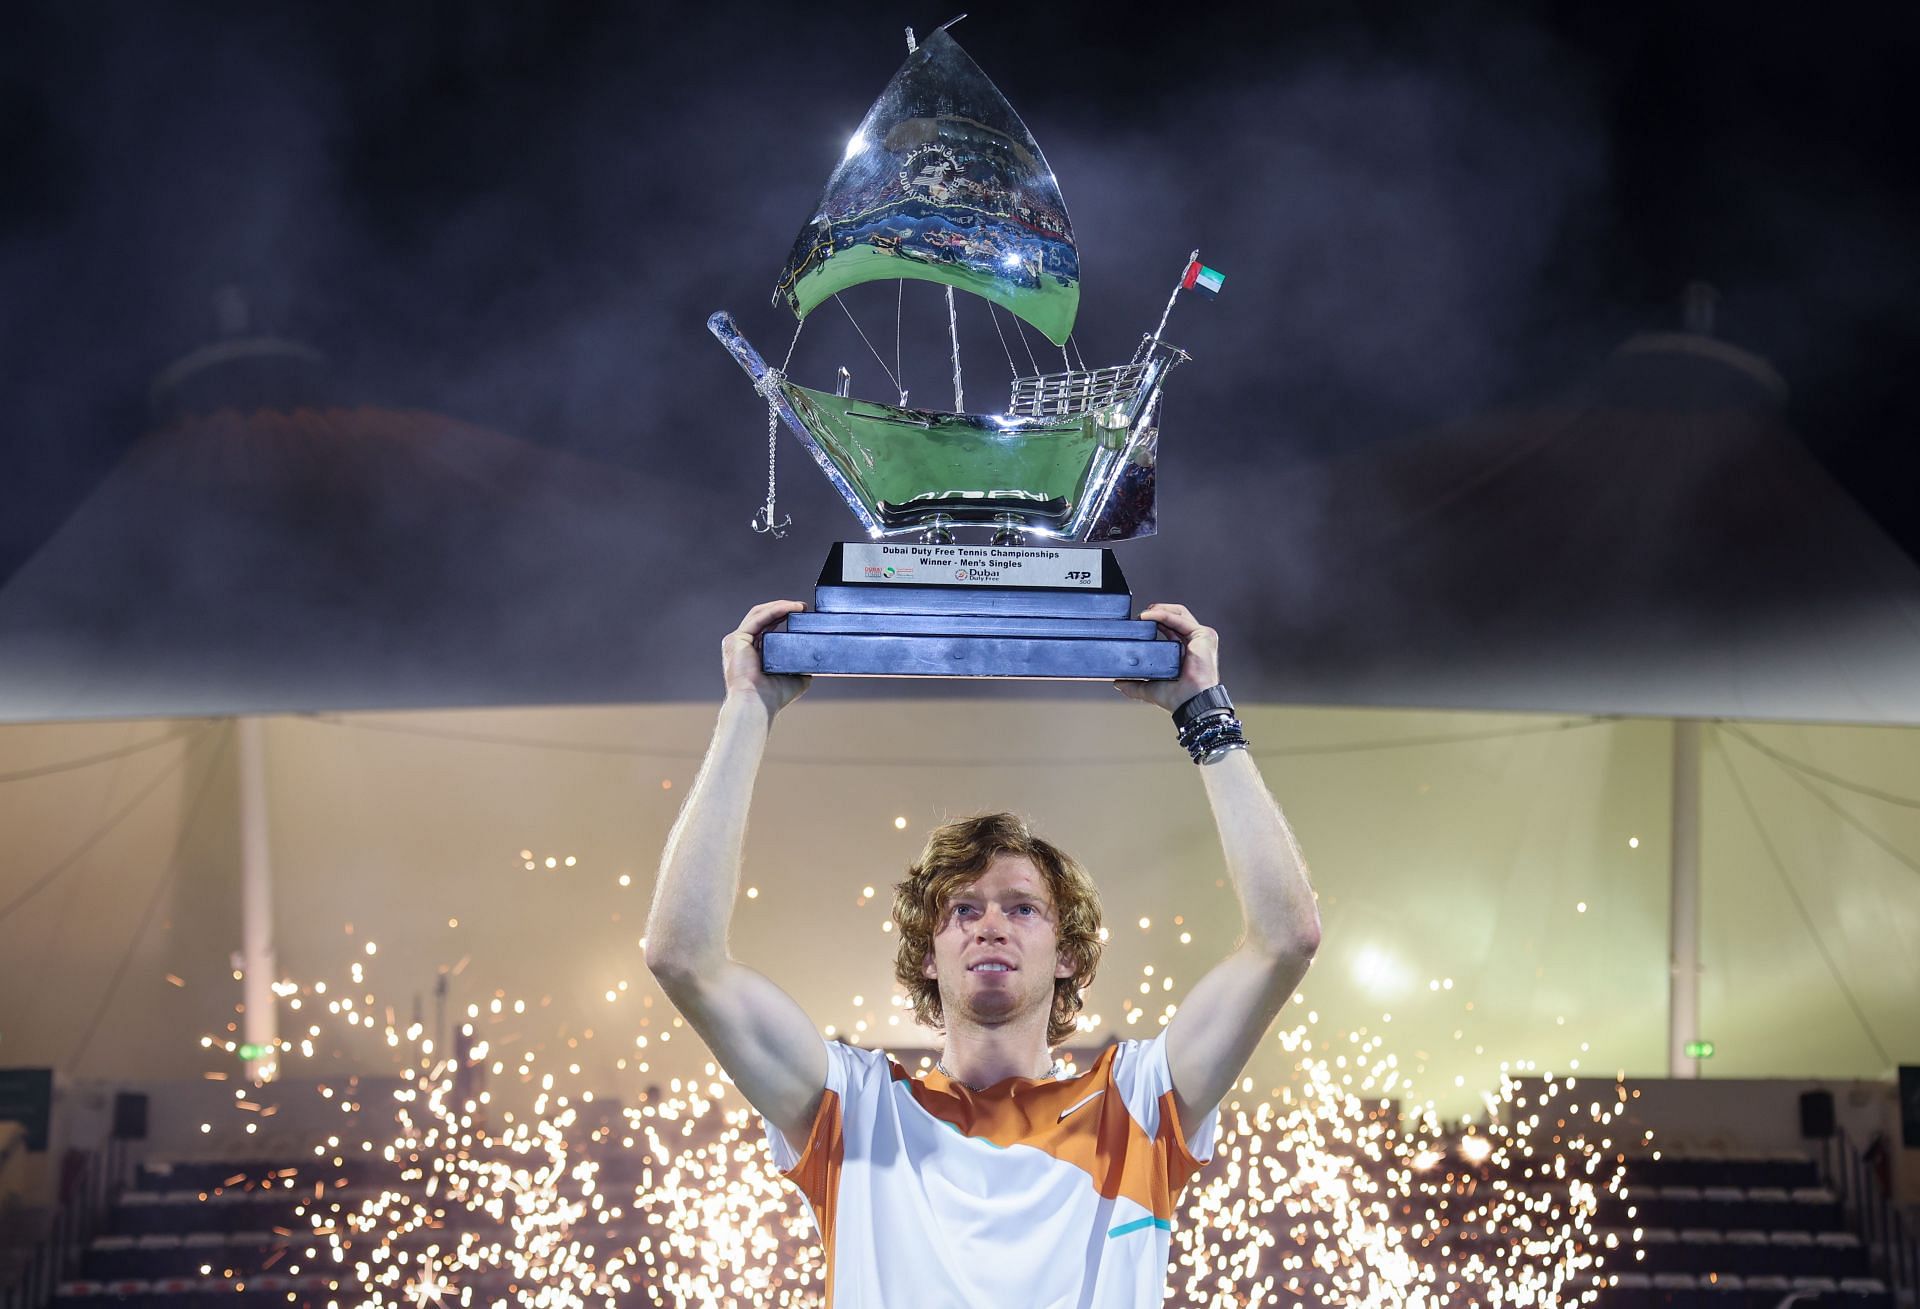 Rublev beats Vesely in Dubai for 10th title and 2nd in week